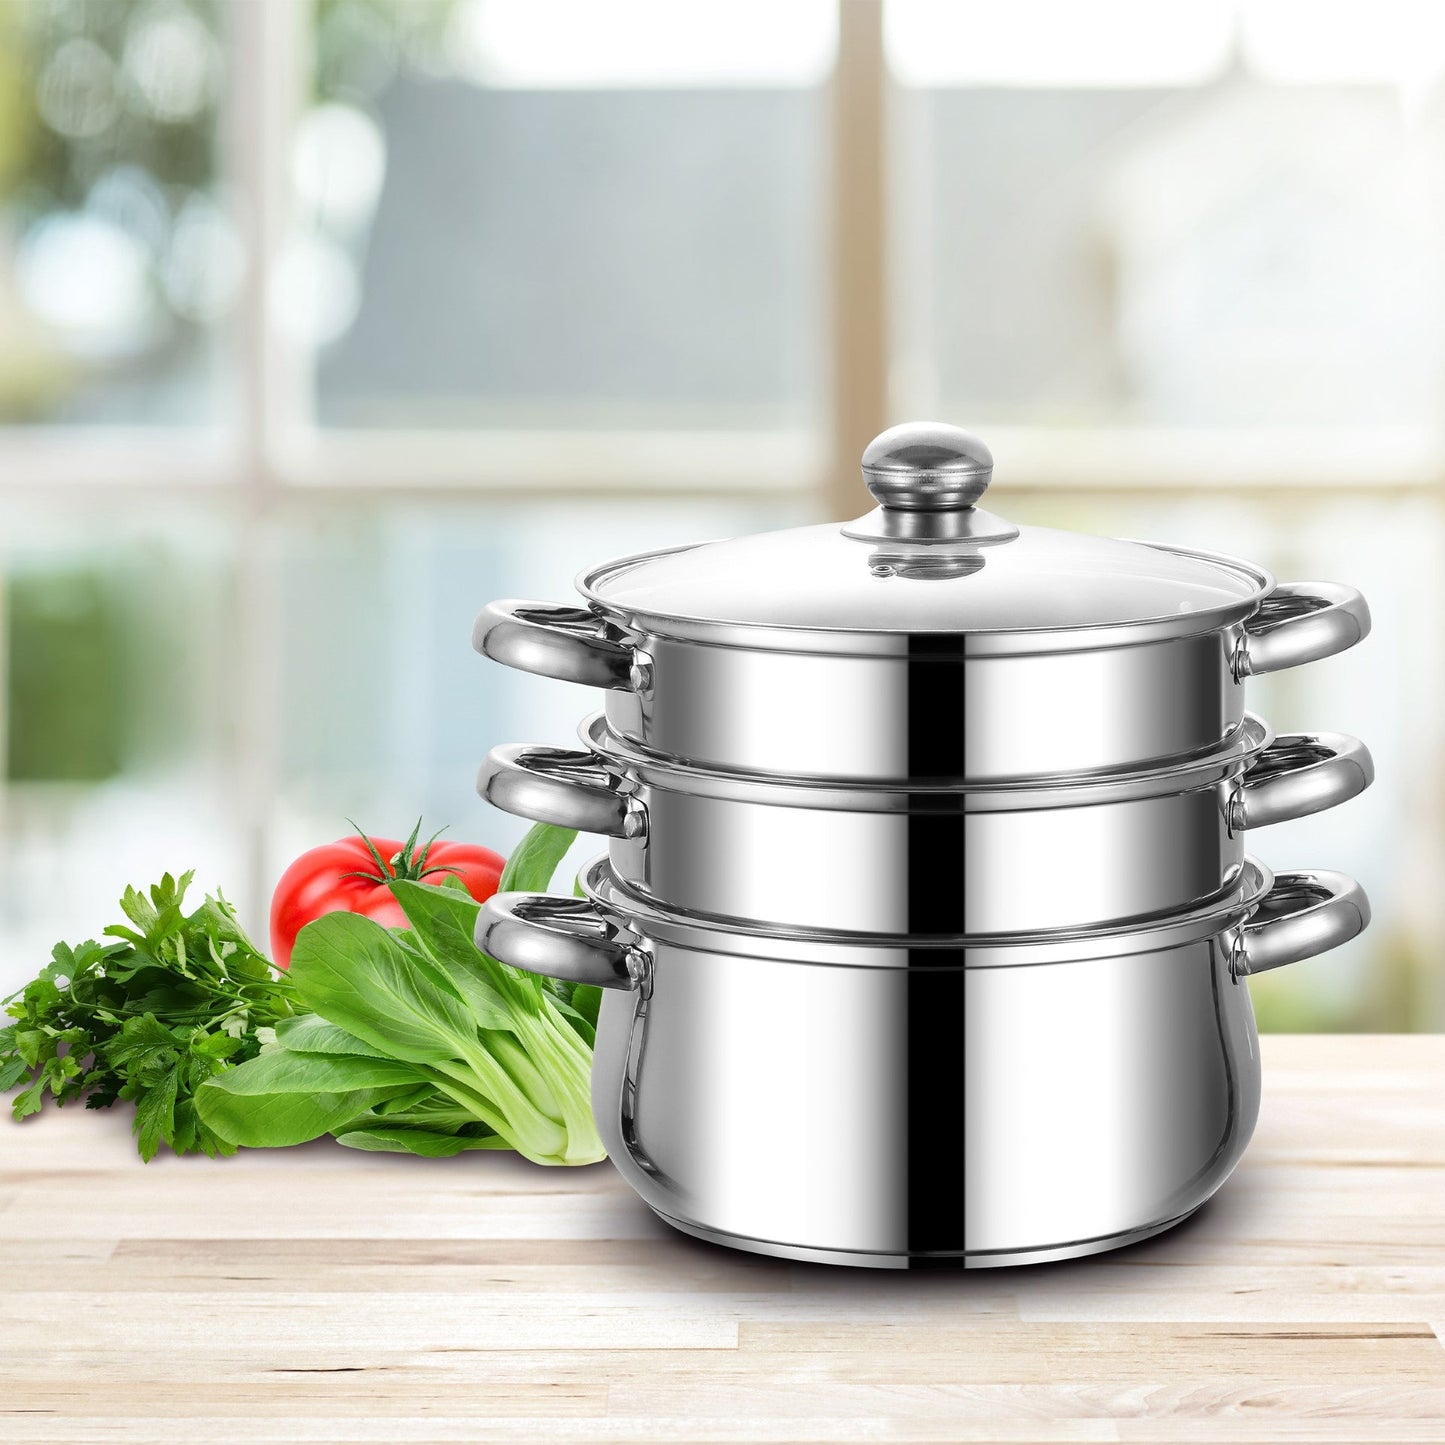 SQ Professional Lustro Stainless Steel Steamer 3 Tier 24 cm 4.5L 7494 (Big Parcel Rate)